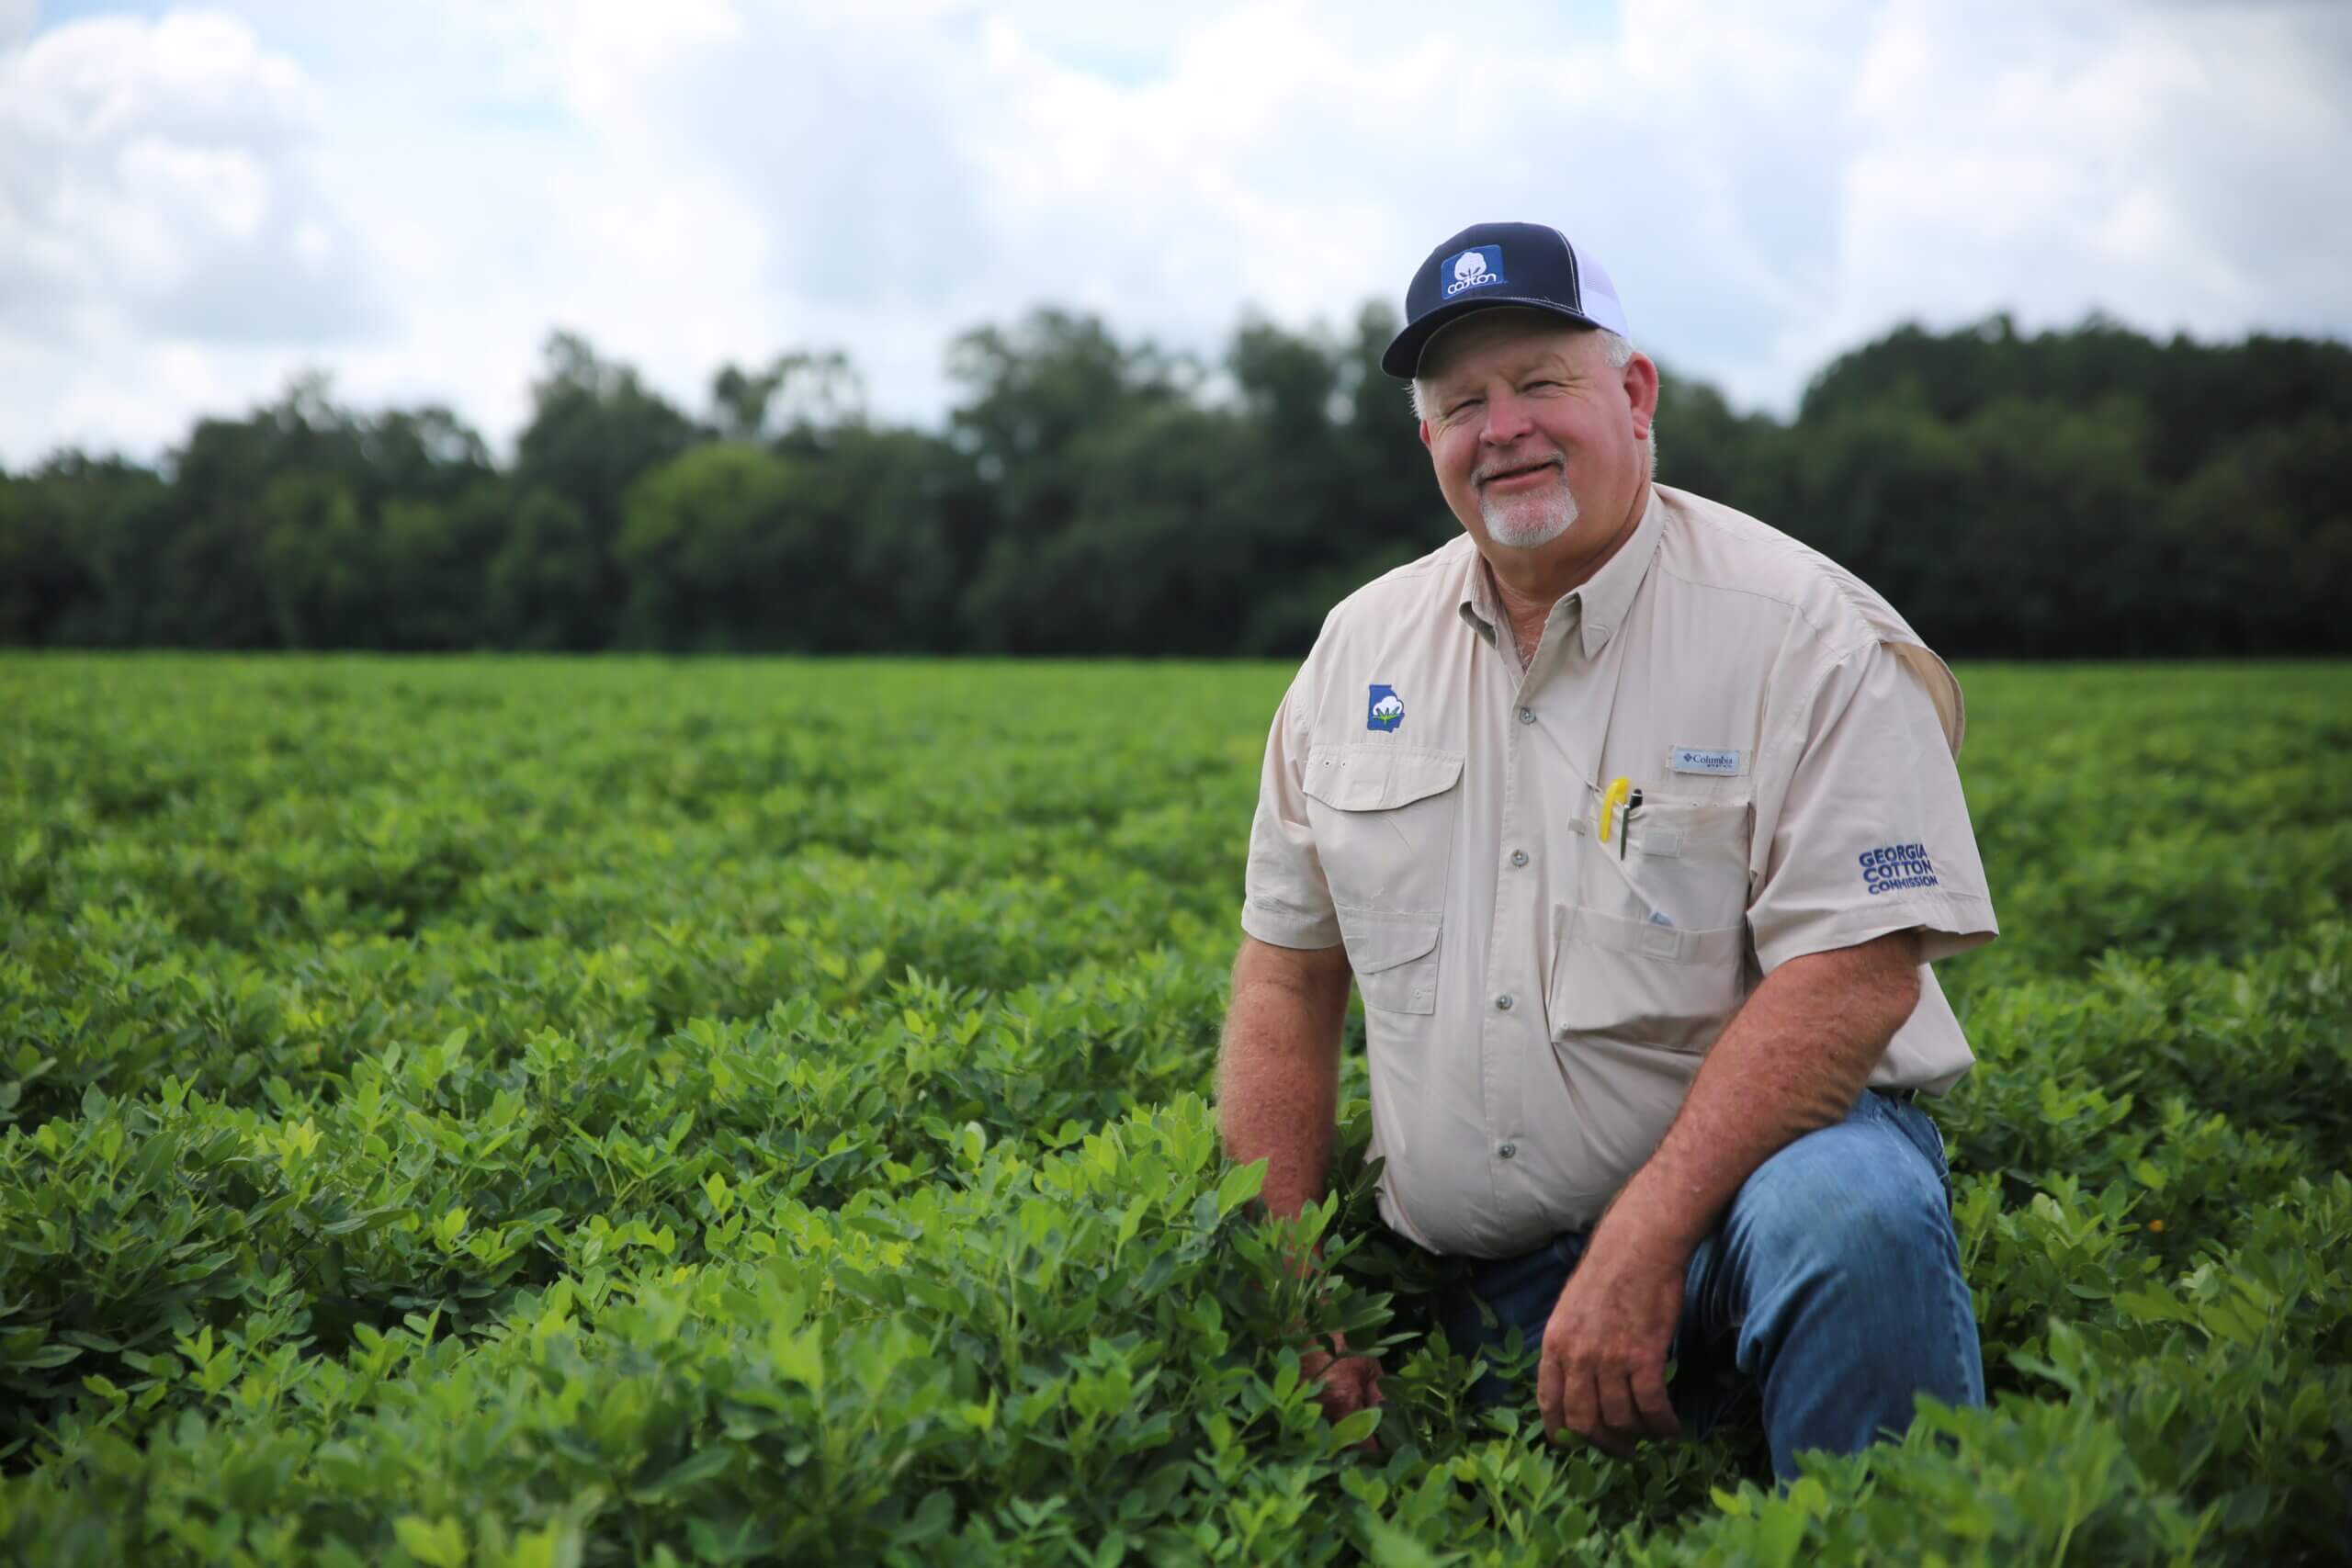 Bart Davis doesn’t seek out accolades or praise, but through an impressive dedication to his farm and the industry, honor found him at this year's Georgia Ag Forecast presentation, where he was recognized as 2023 Georgia Farmer of the Year.